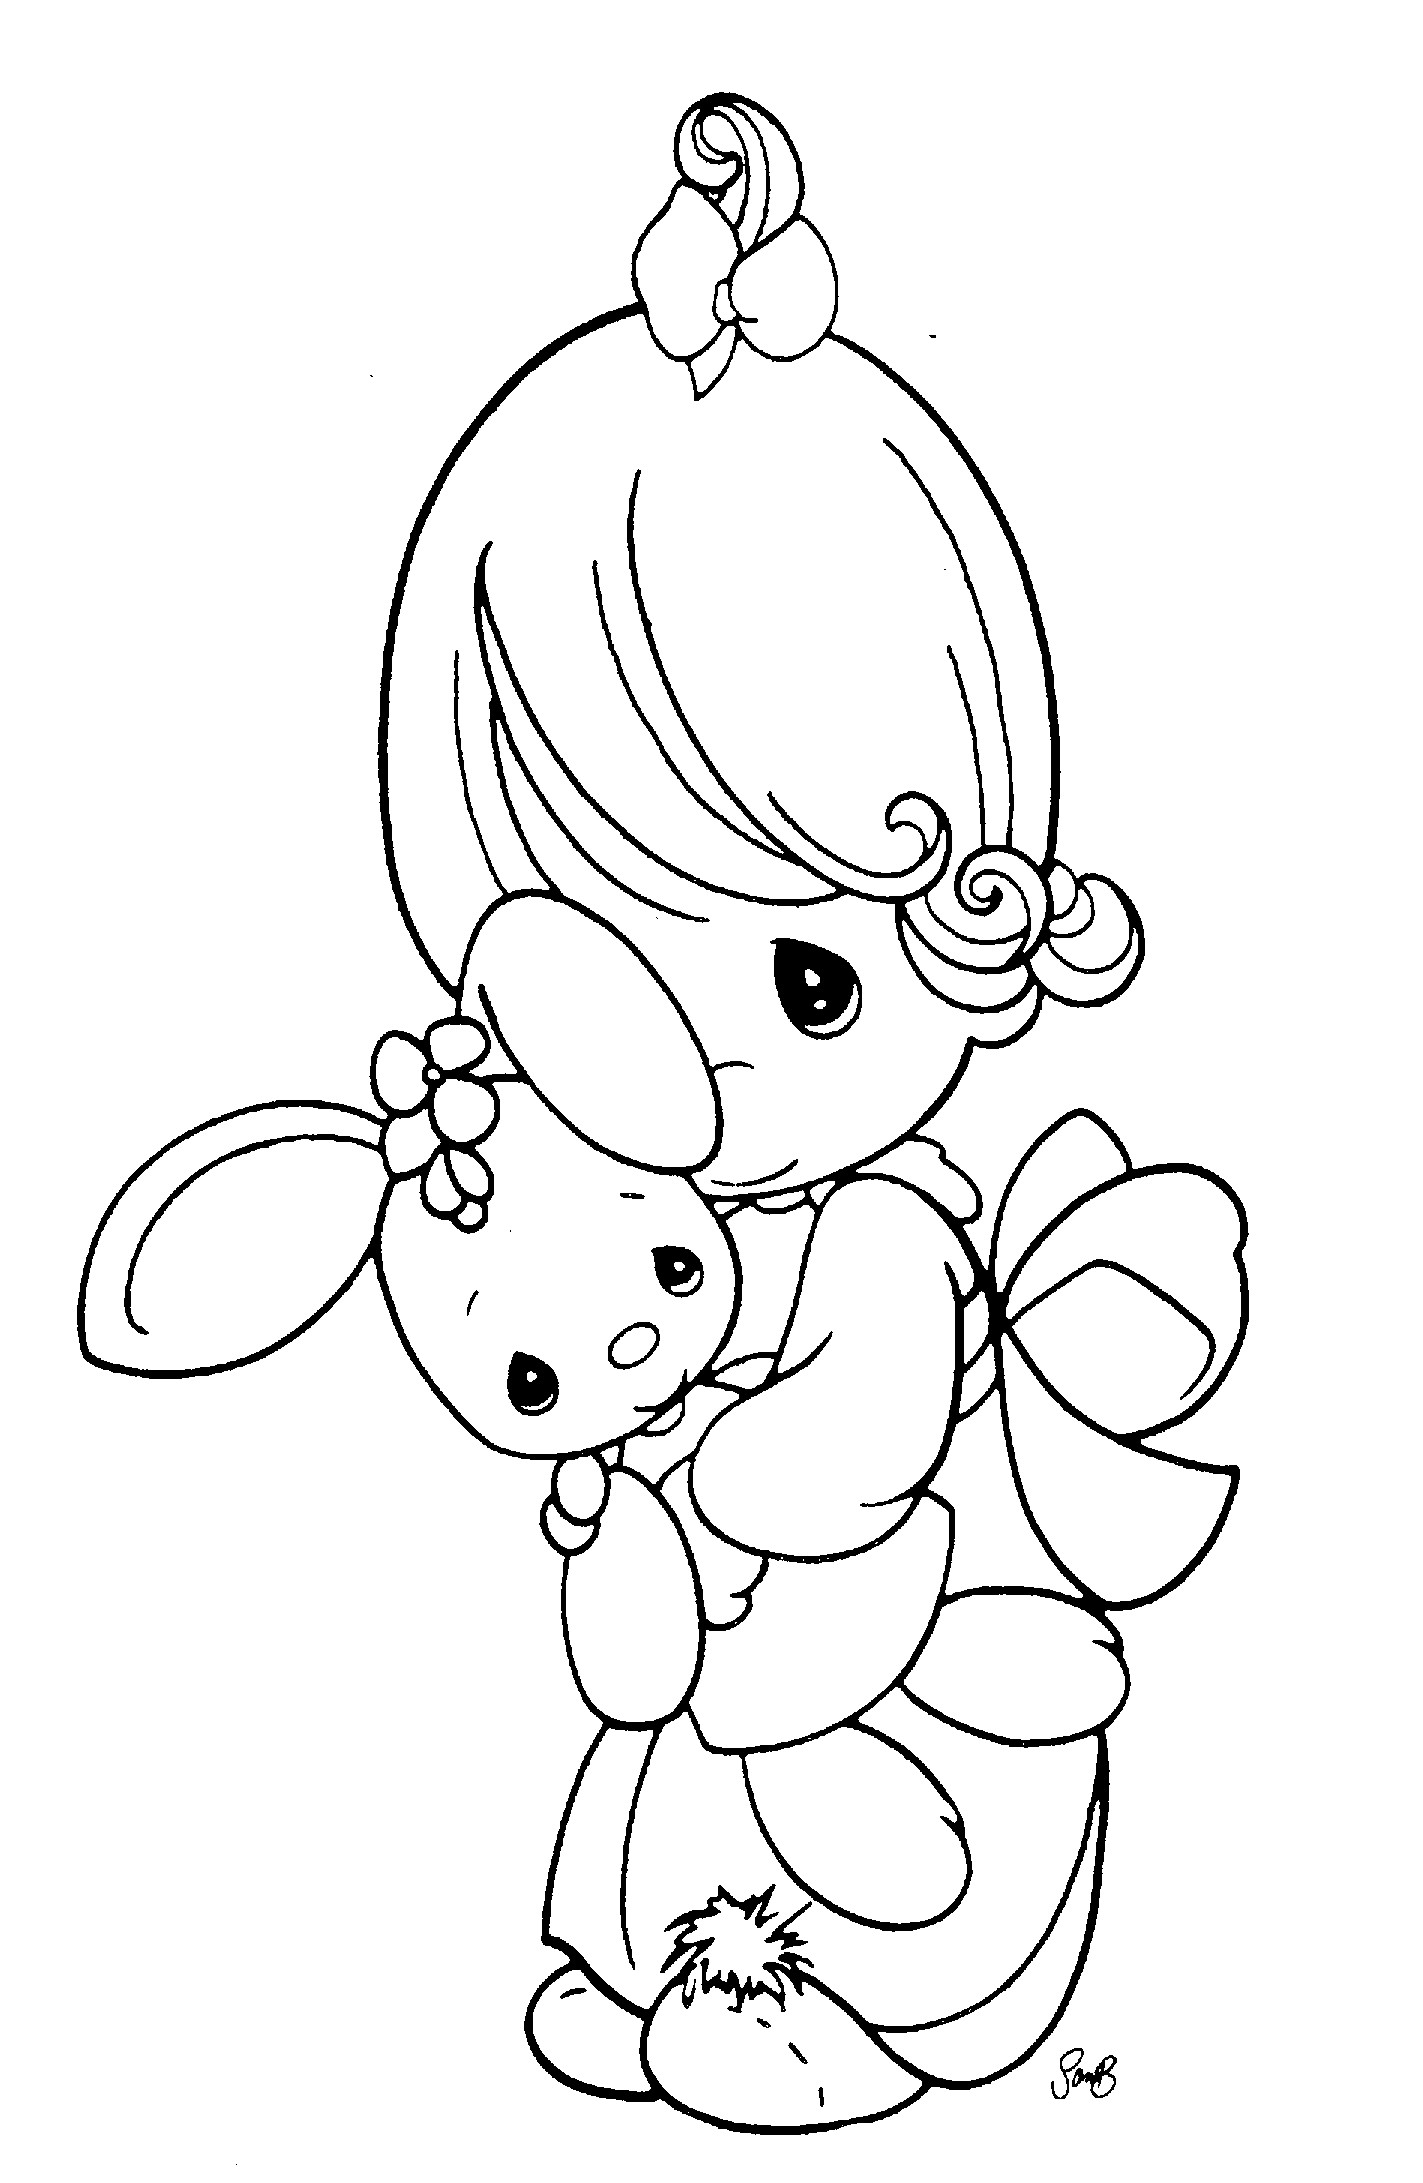 1423x2183 Here is a collection of some of the finest Precious Moments coloring pages,  chosen based